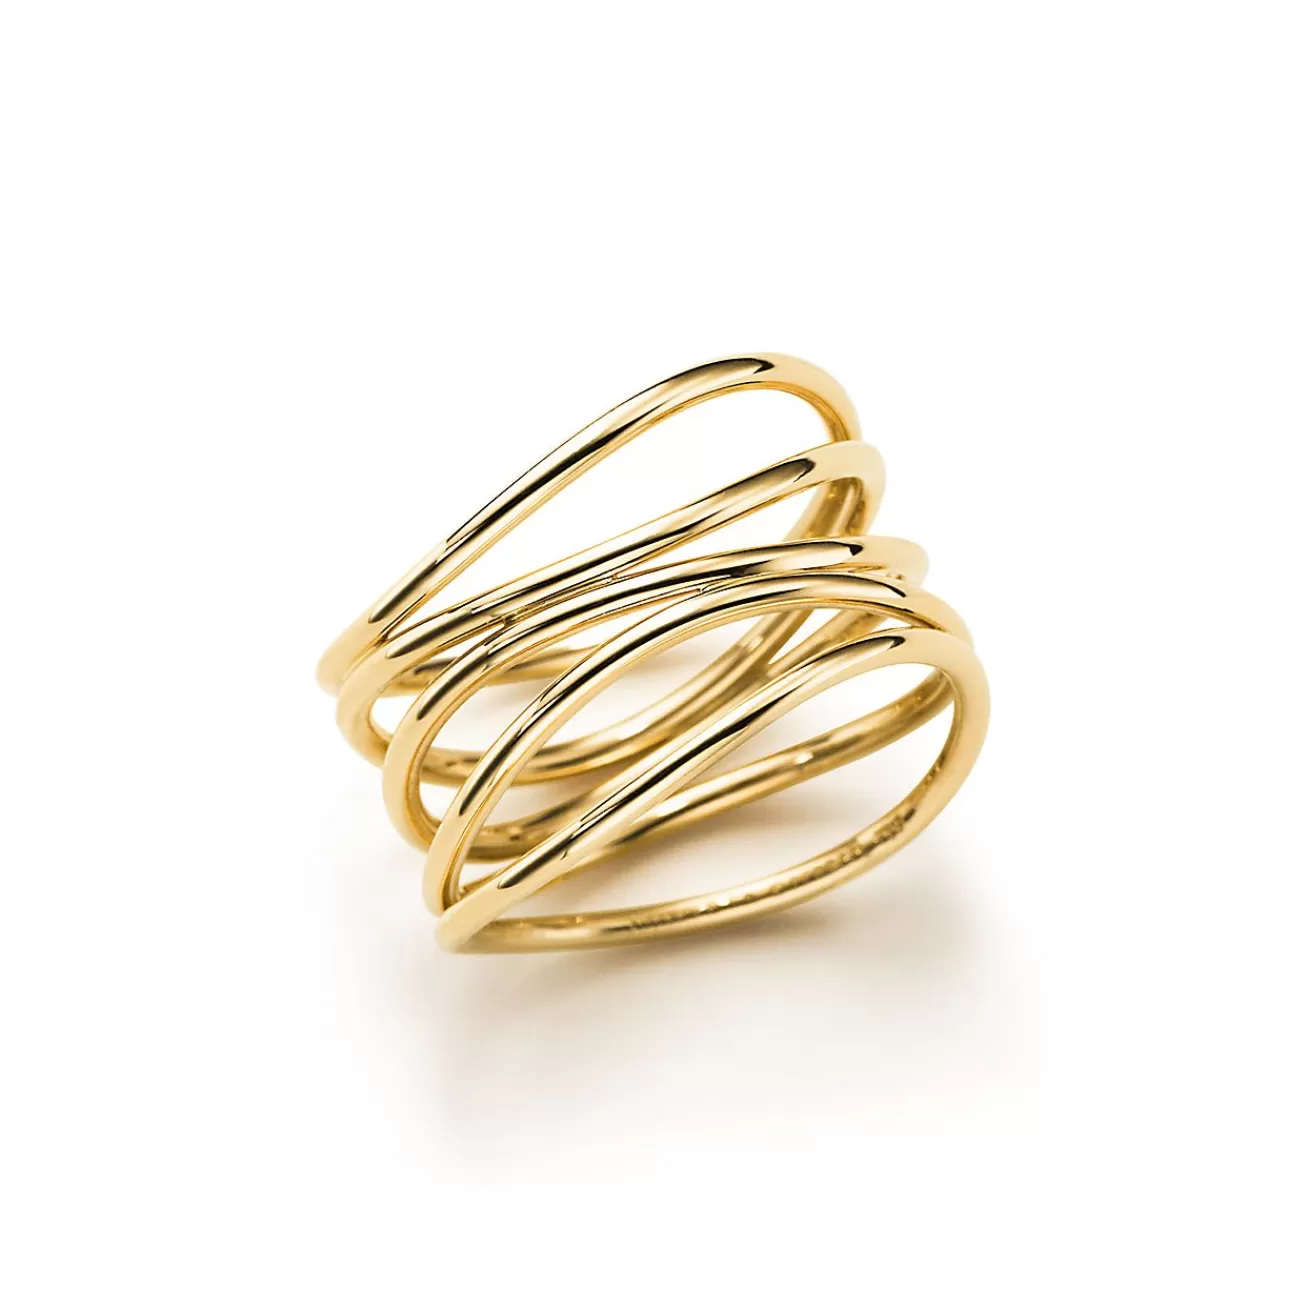 Tiffany & Co. Elsa Peretti® Wave ring in 18k gold. | ^ Rings | Gold Jewelry